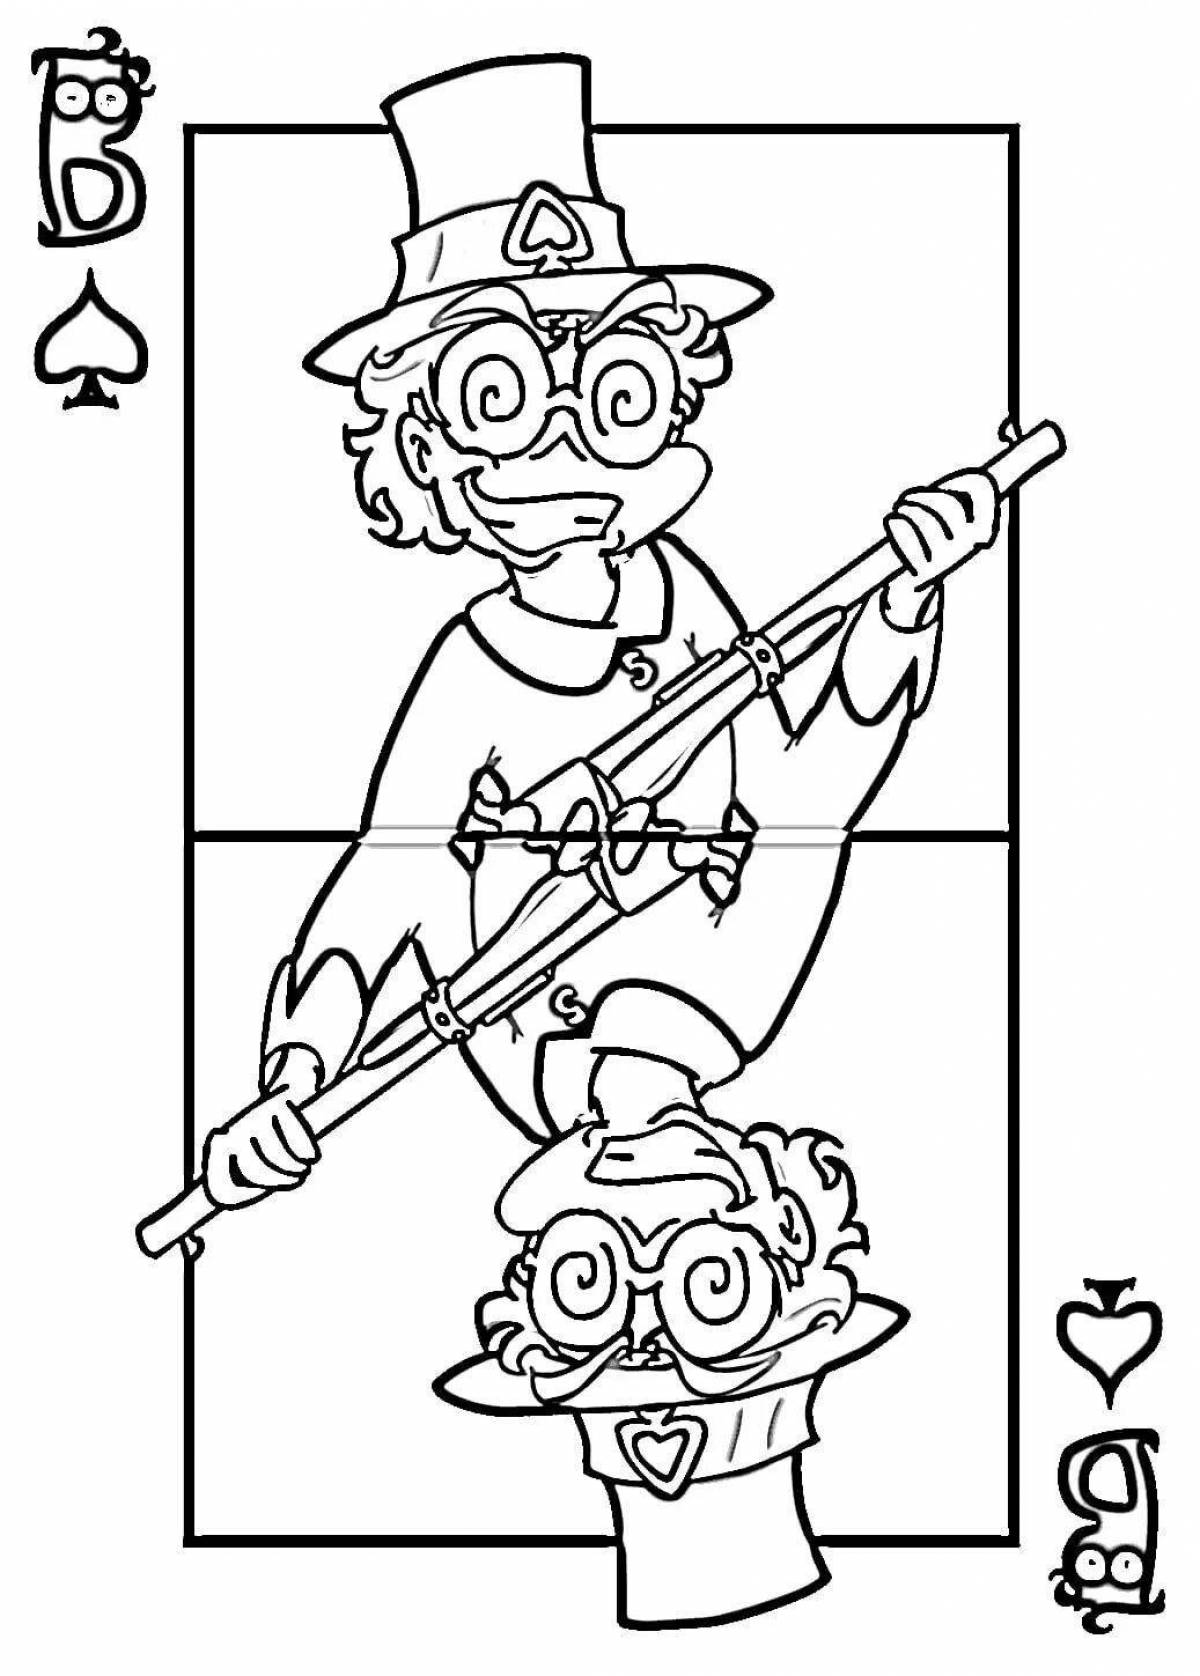 Coloring page blessed vara